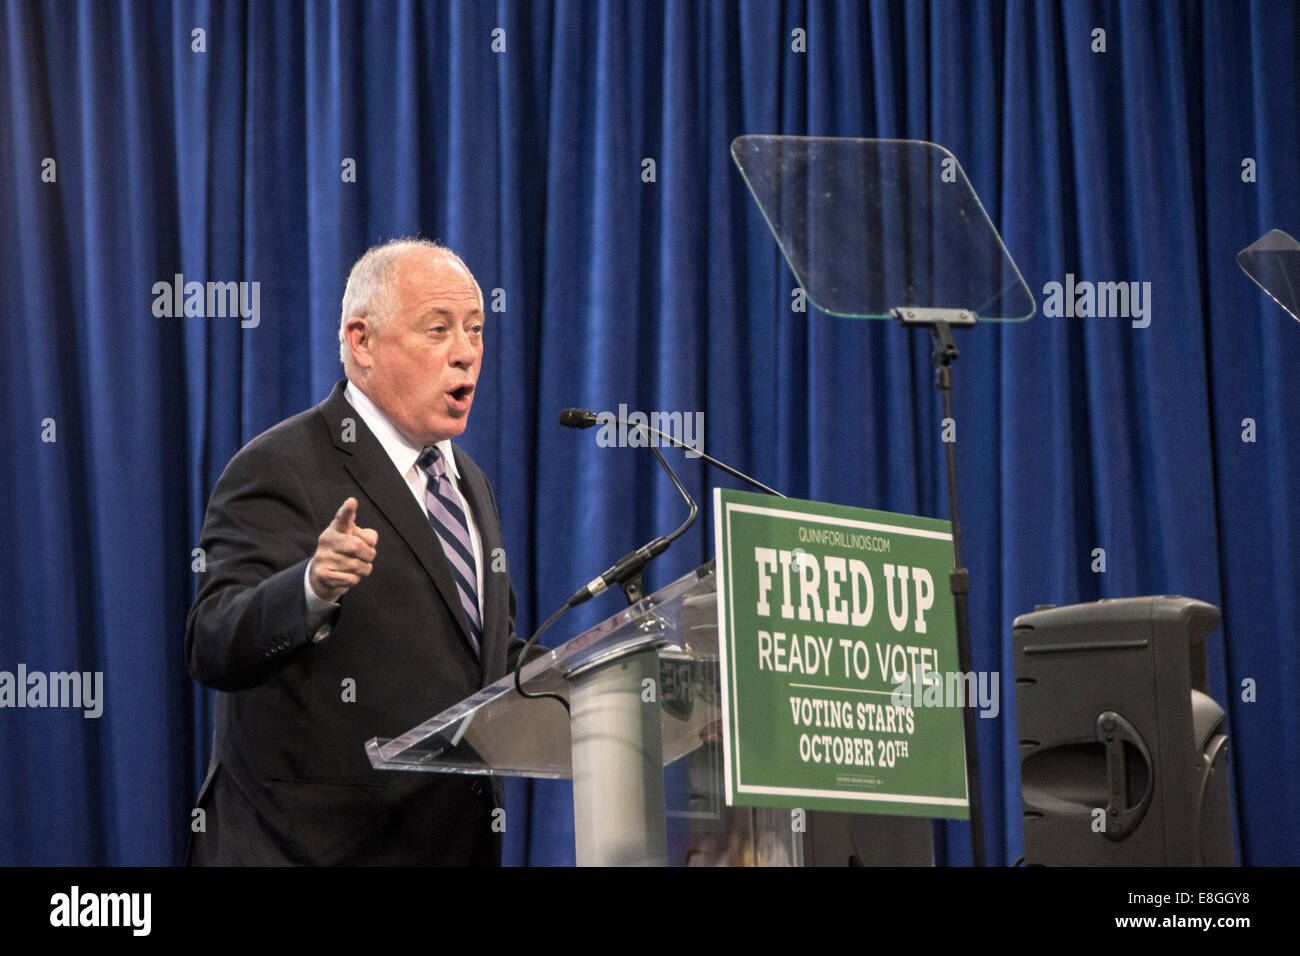 Chicago, Illinois, USA. 7th October, 2014.  Governor of Illinois, Pat Quinn told the crowd that “Illinois is Obama country and always will be.” in UIC pavillion, chicago. Credit:  Nisarg Lakhmani/Alamy Live News Stock Photo